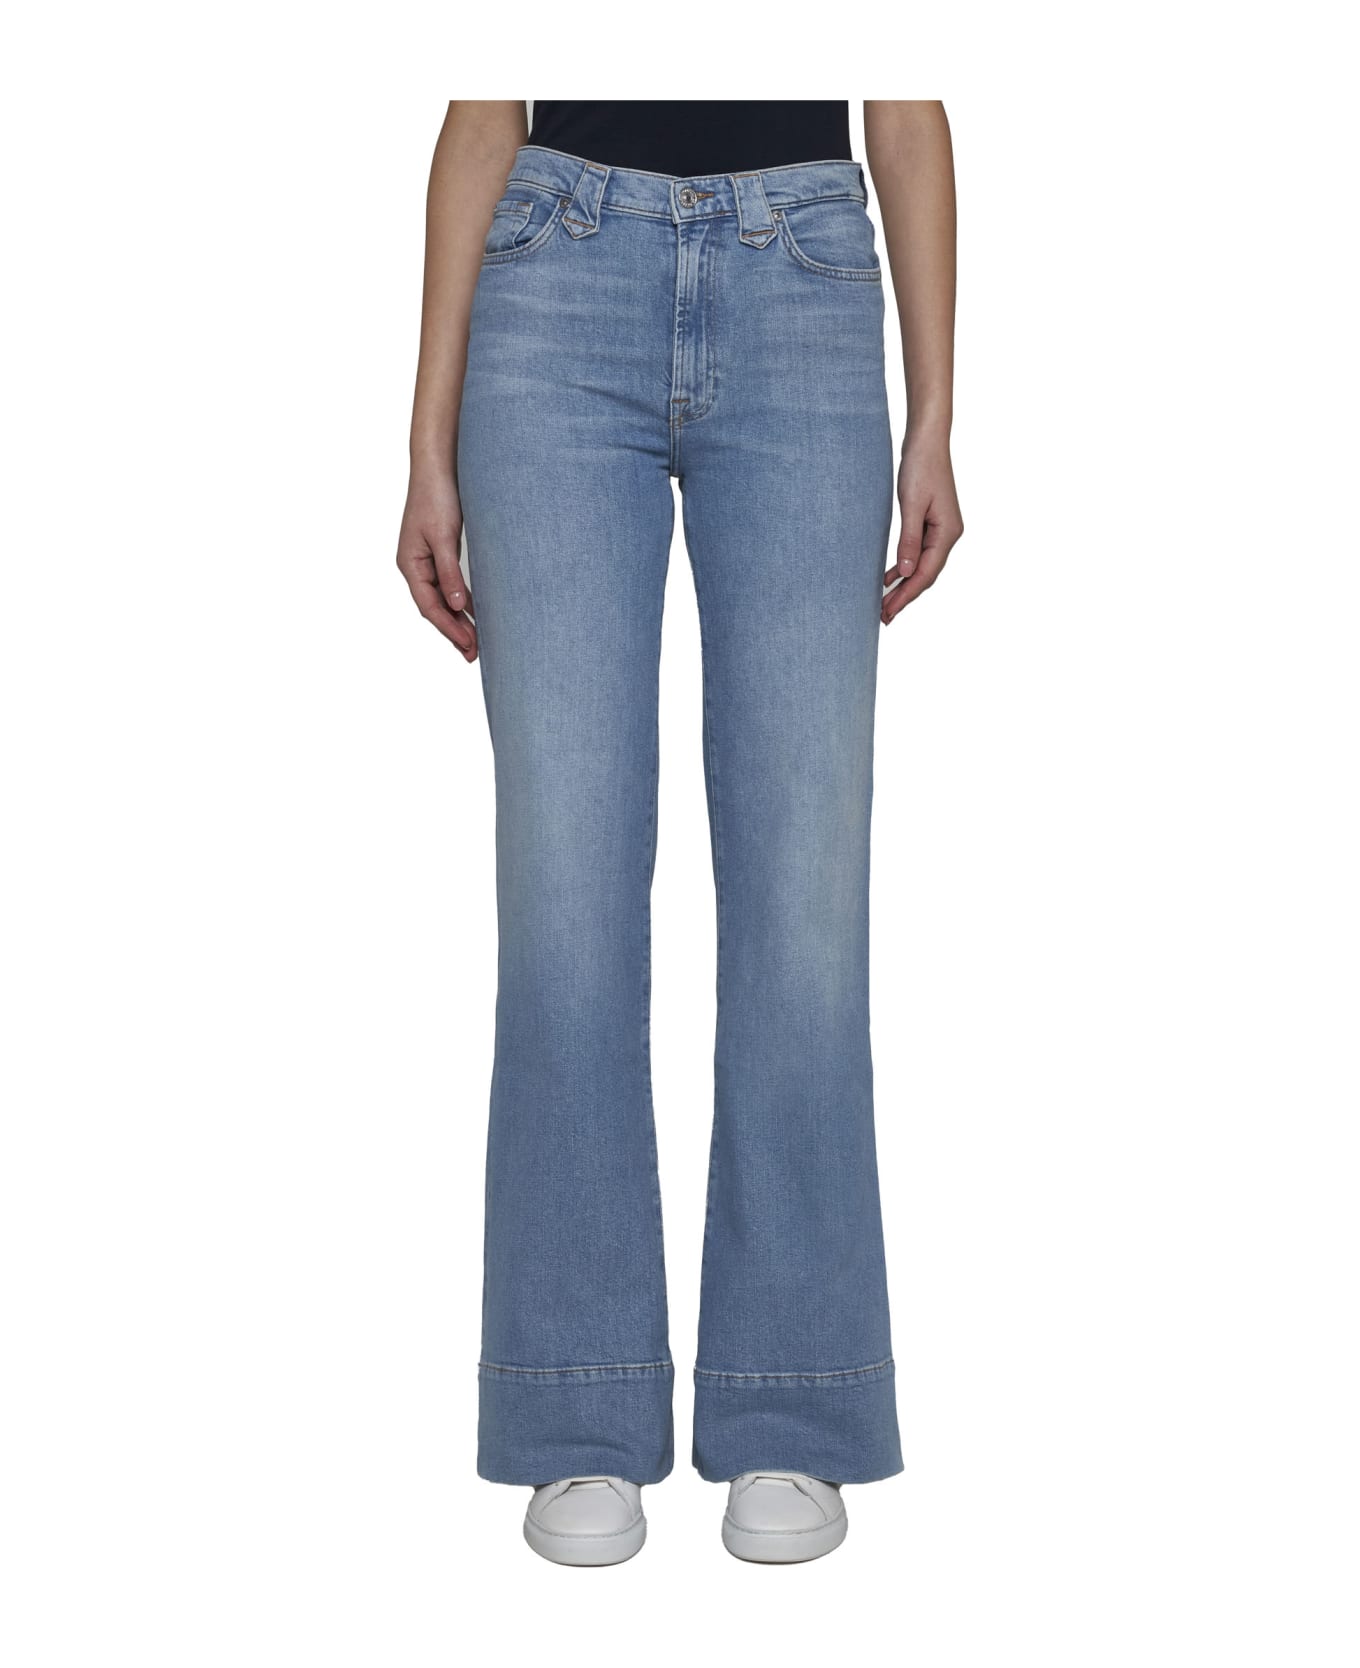 7 For All Mankind Jeans - Light blue